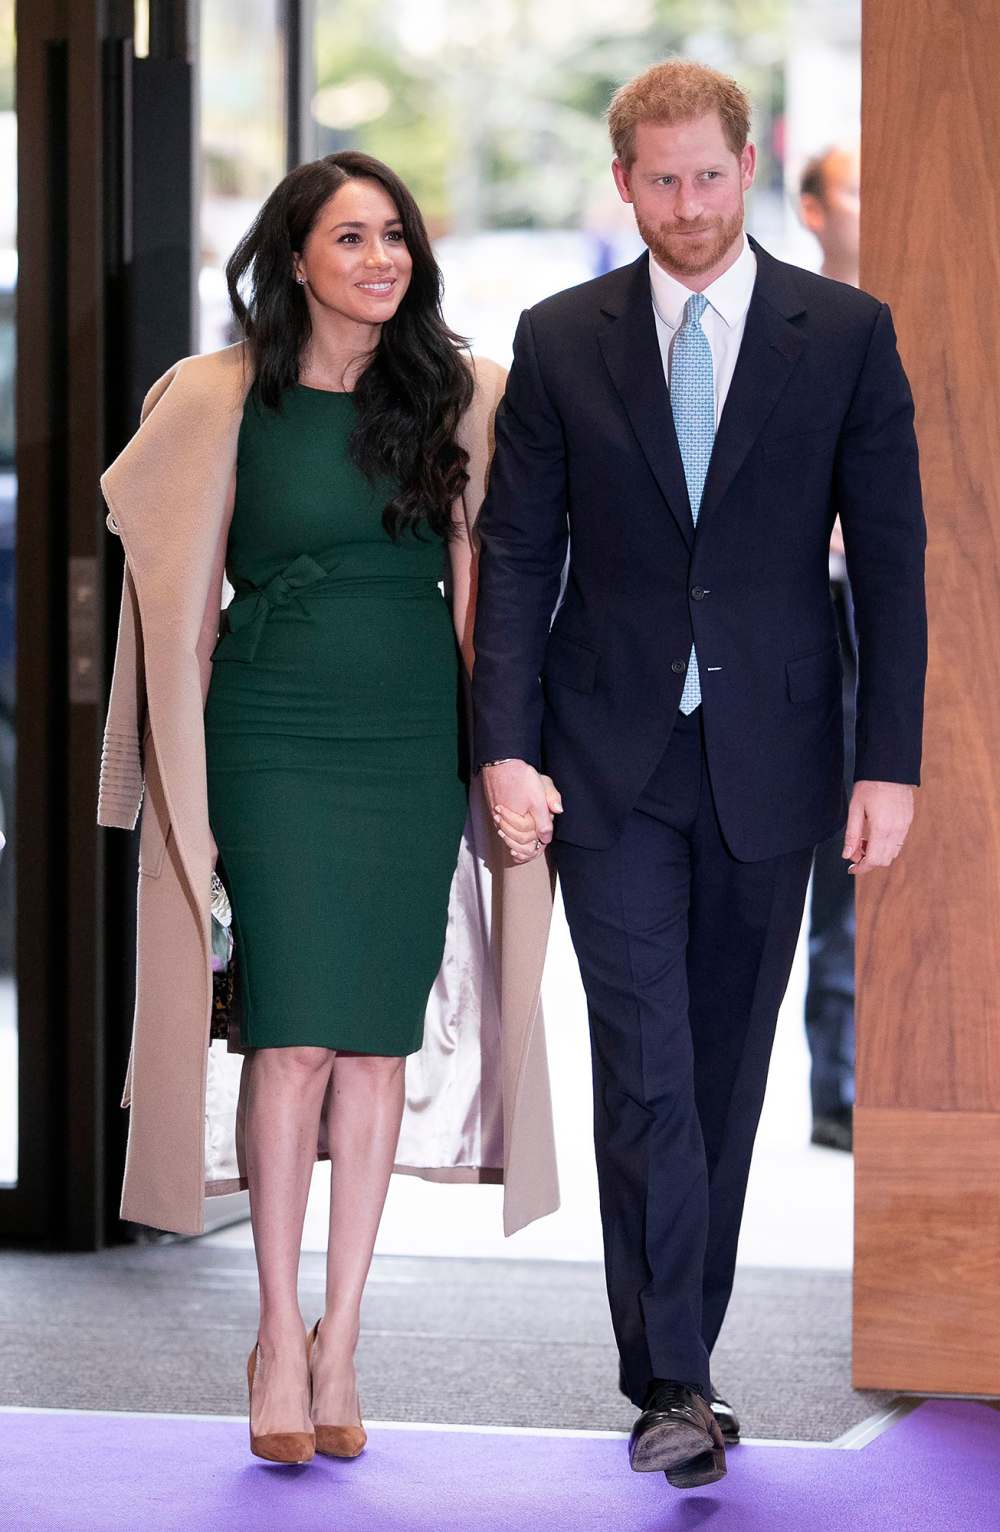 Prince Harry and Meghan Markle Announce Parental Leave From Archewell After Lili's Birth